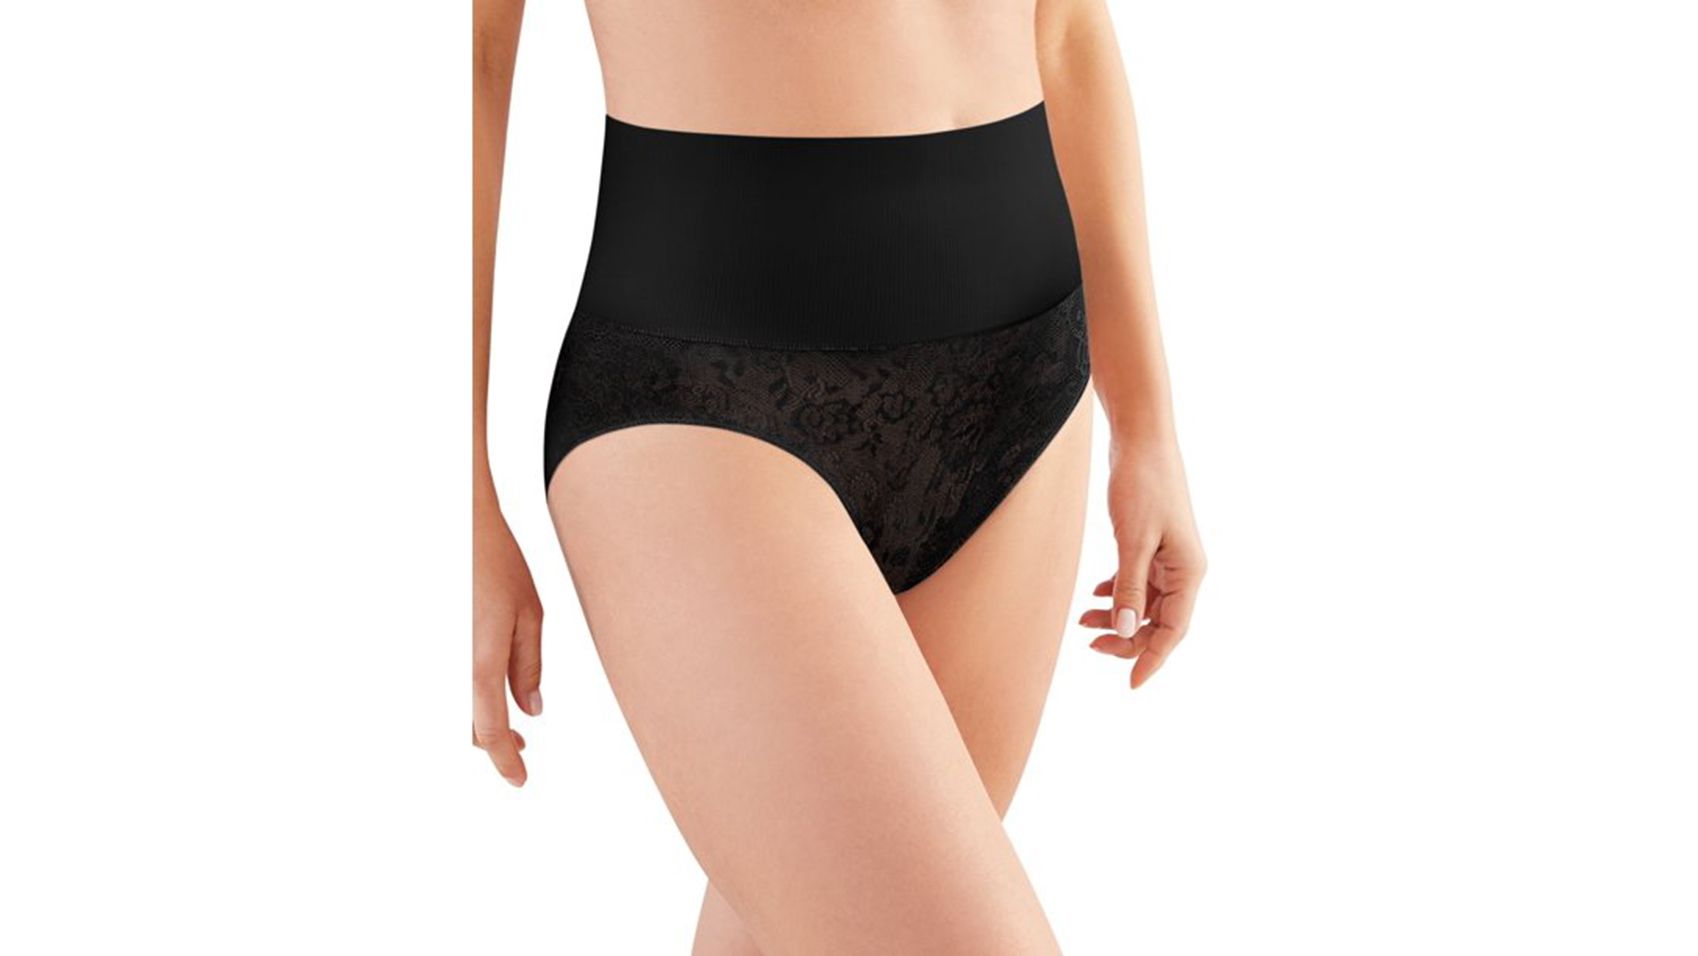 Buy Bali Women's Shapewear Double Support Coordinate Brief with